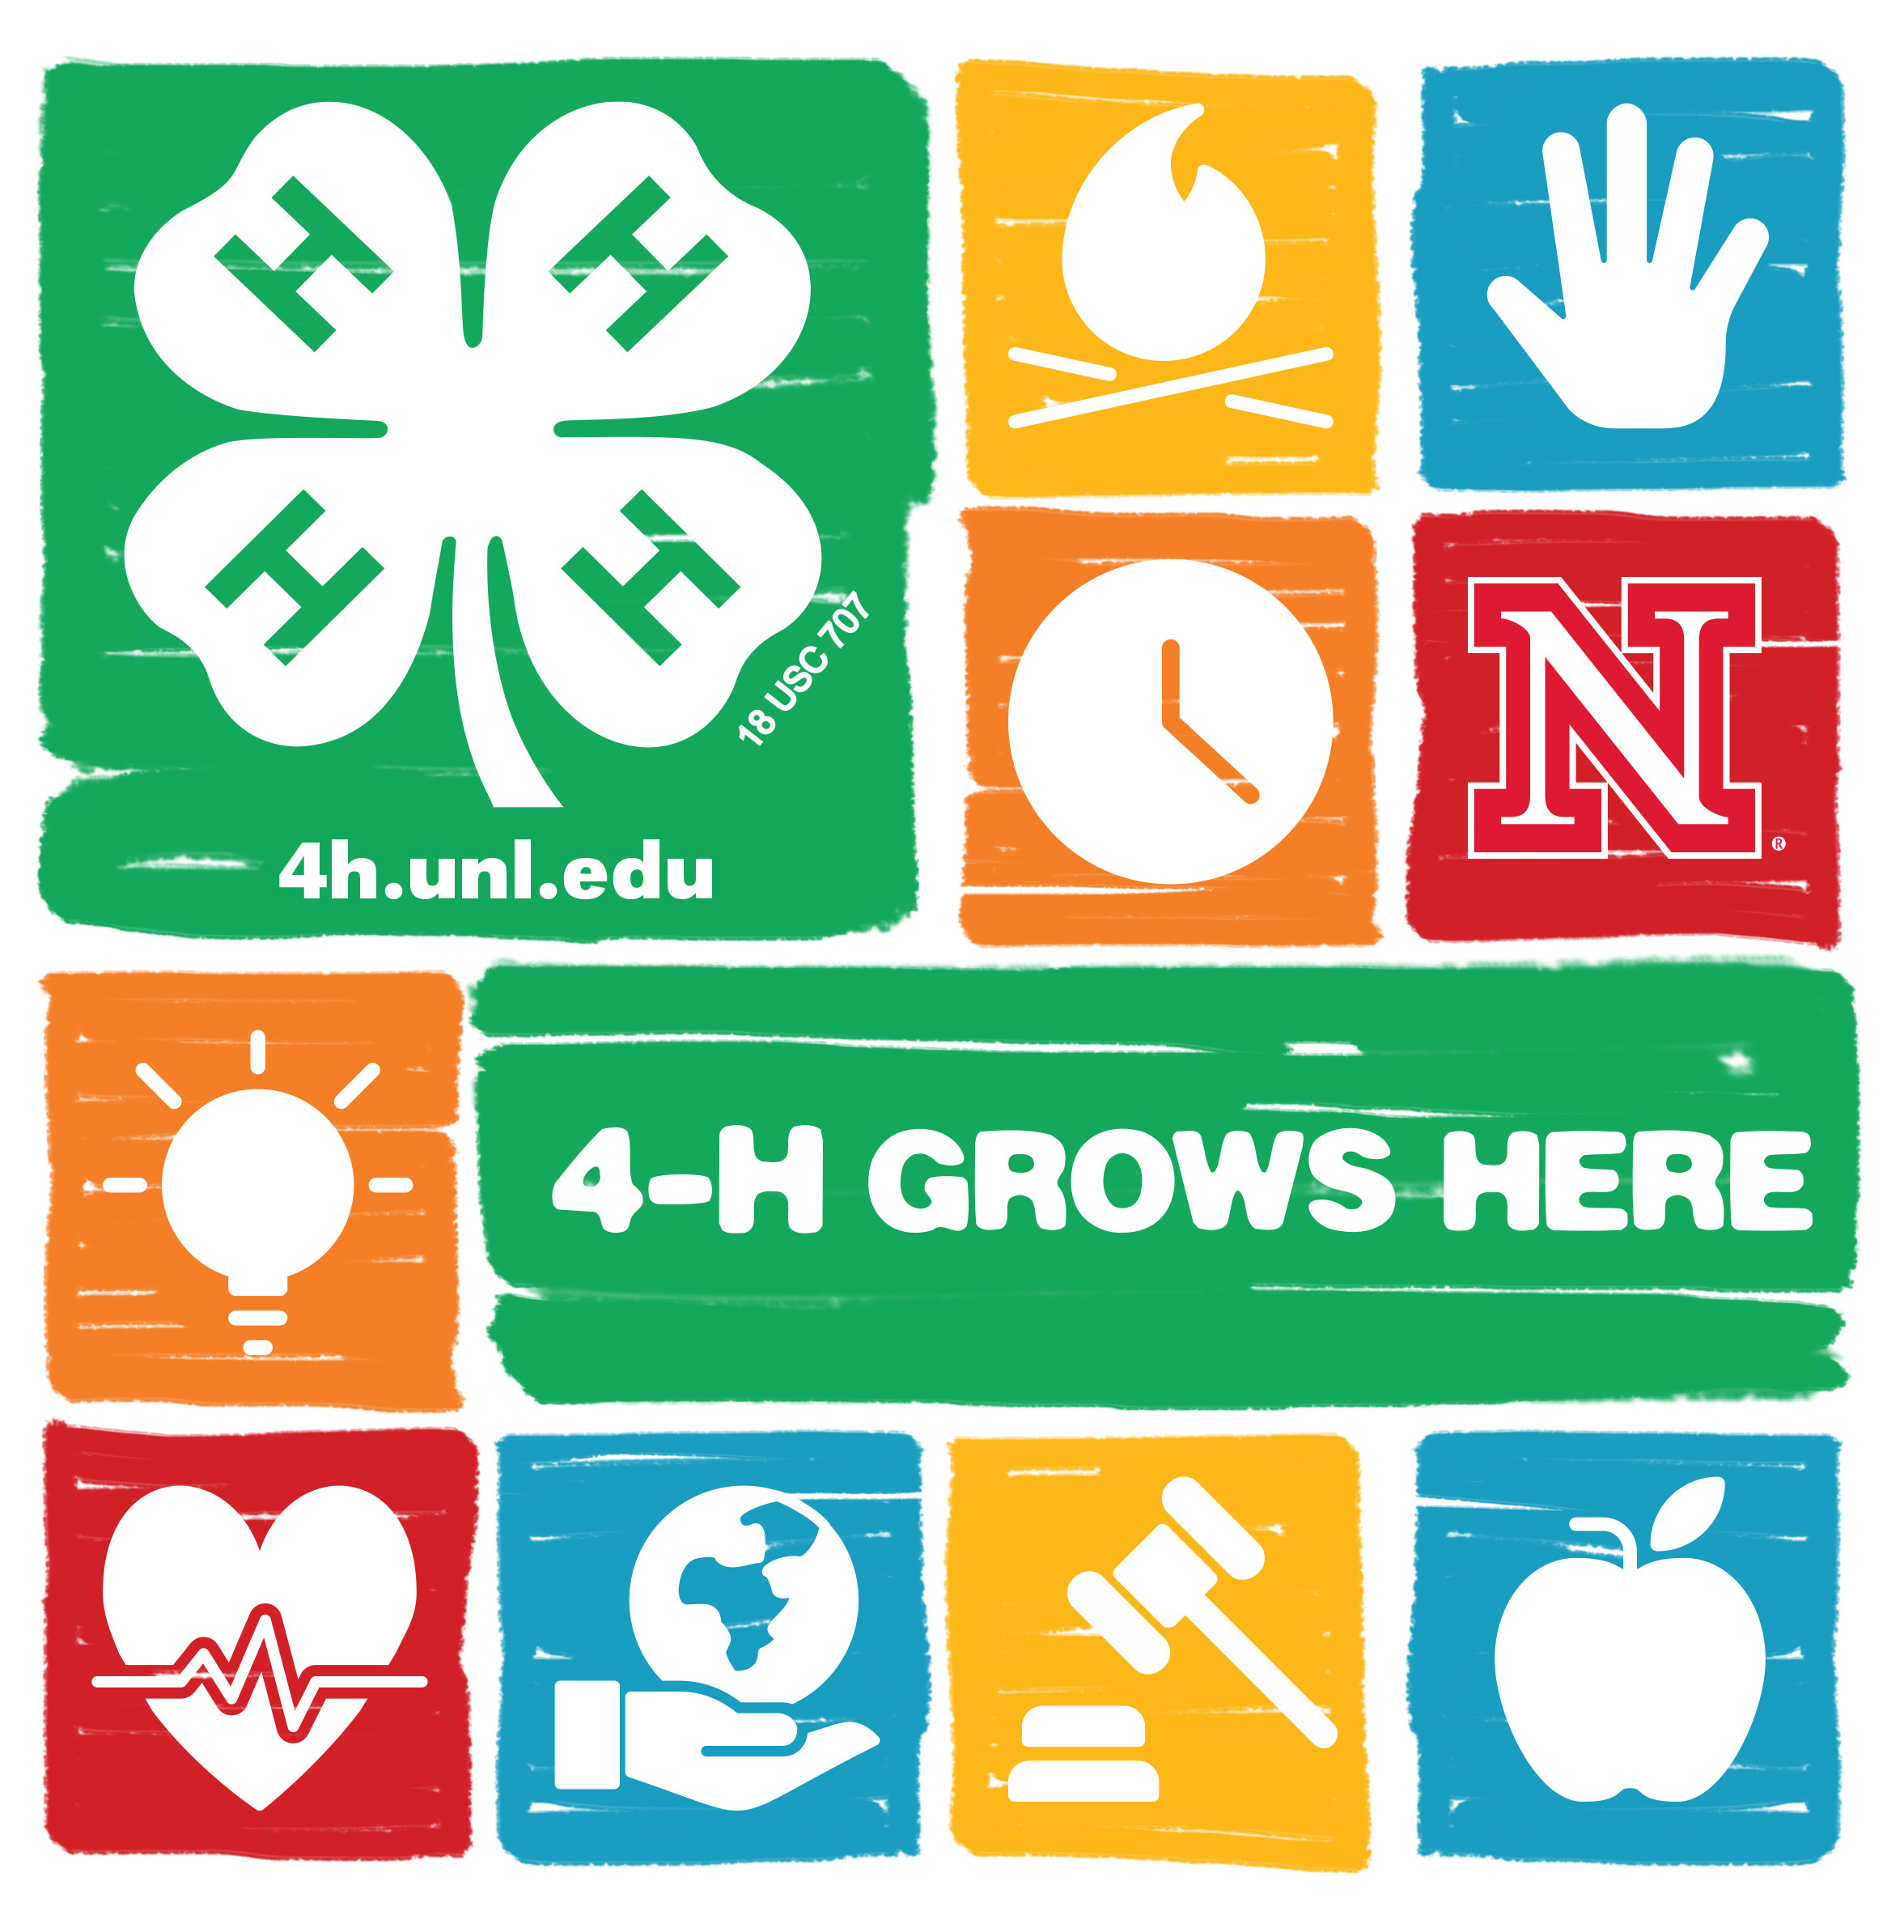 4-H Promotional Booklet